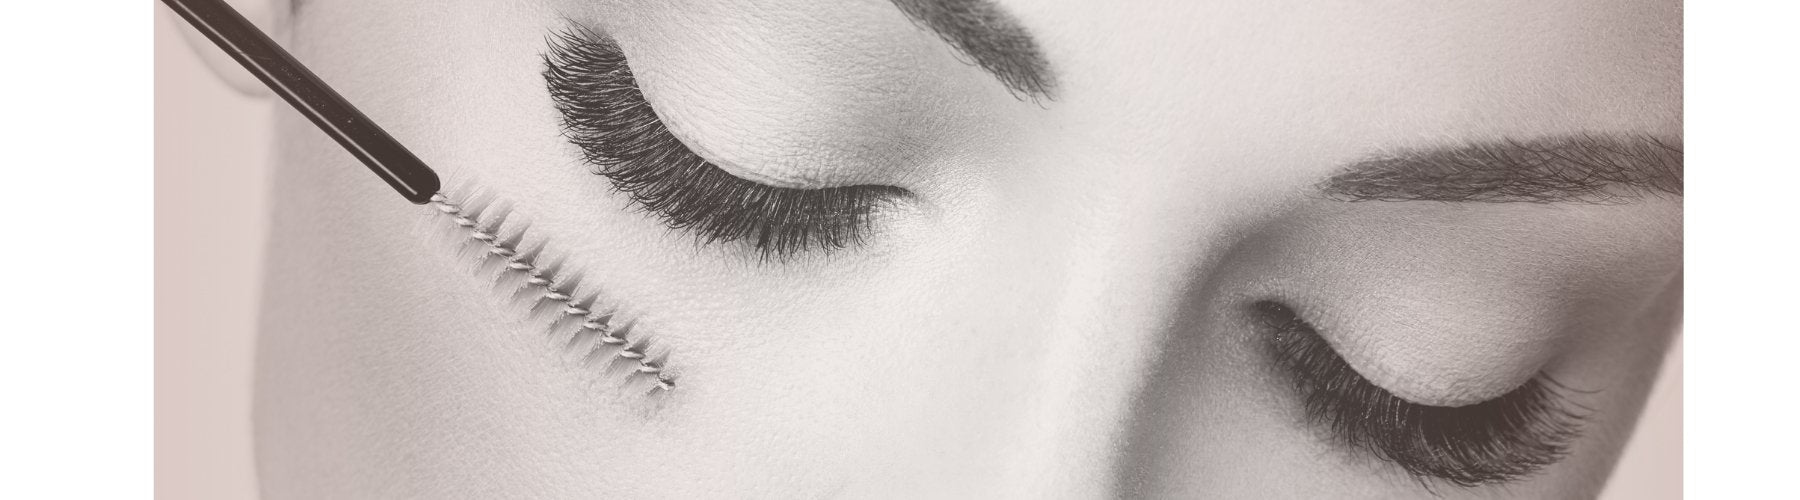 How to Use HÜR Beauty Products to Create Wispy and Different Lash Styles - HUR BEAUTY